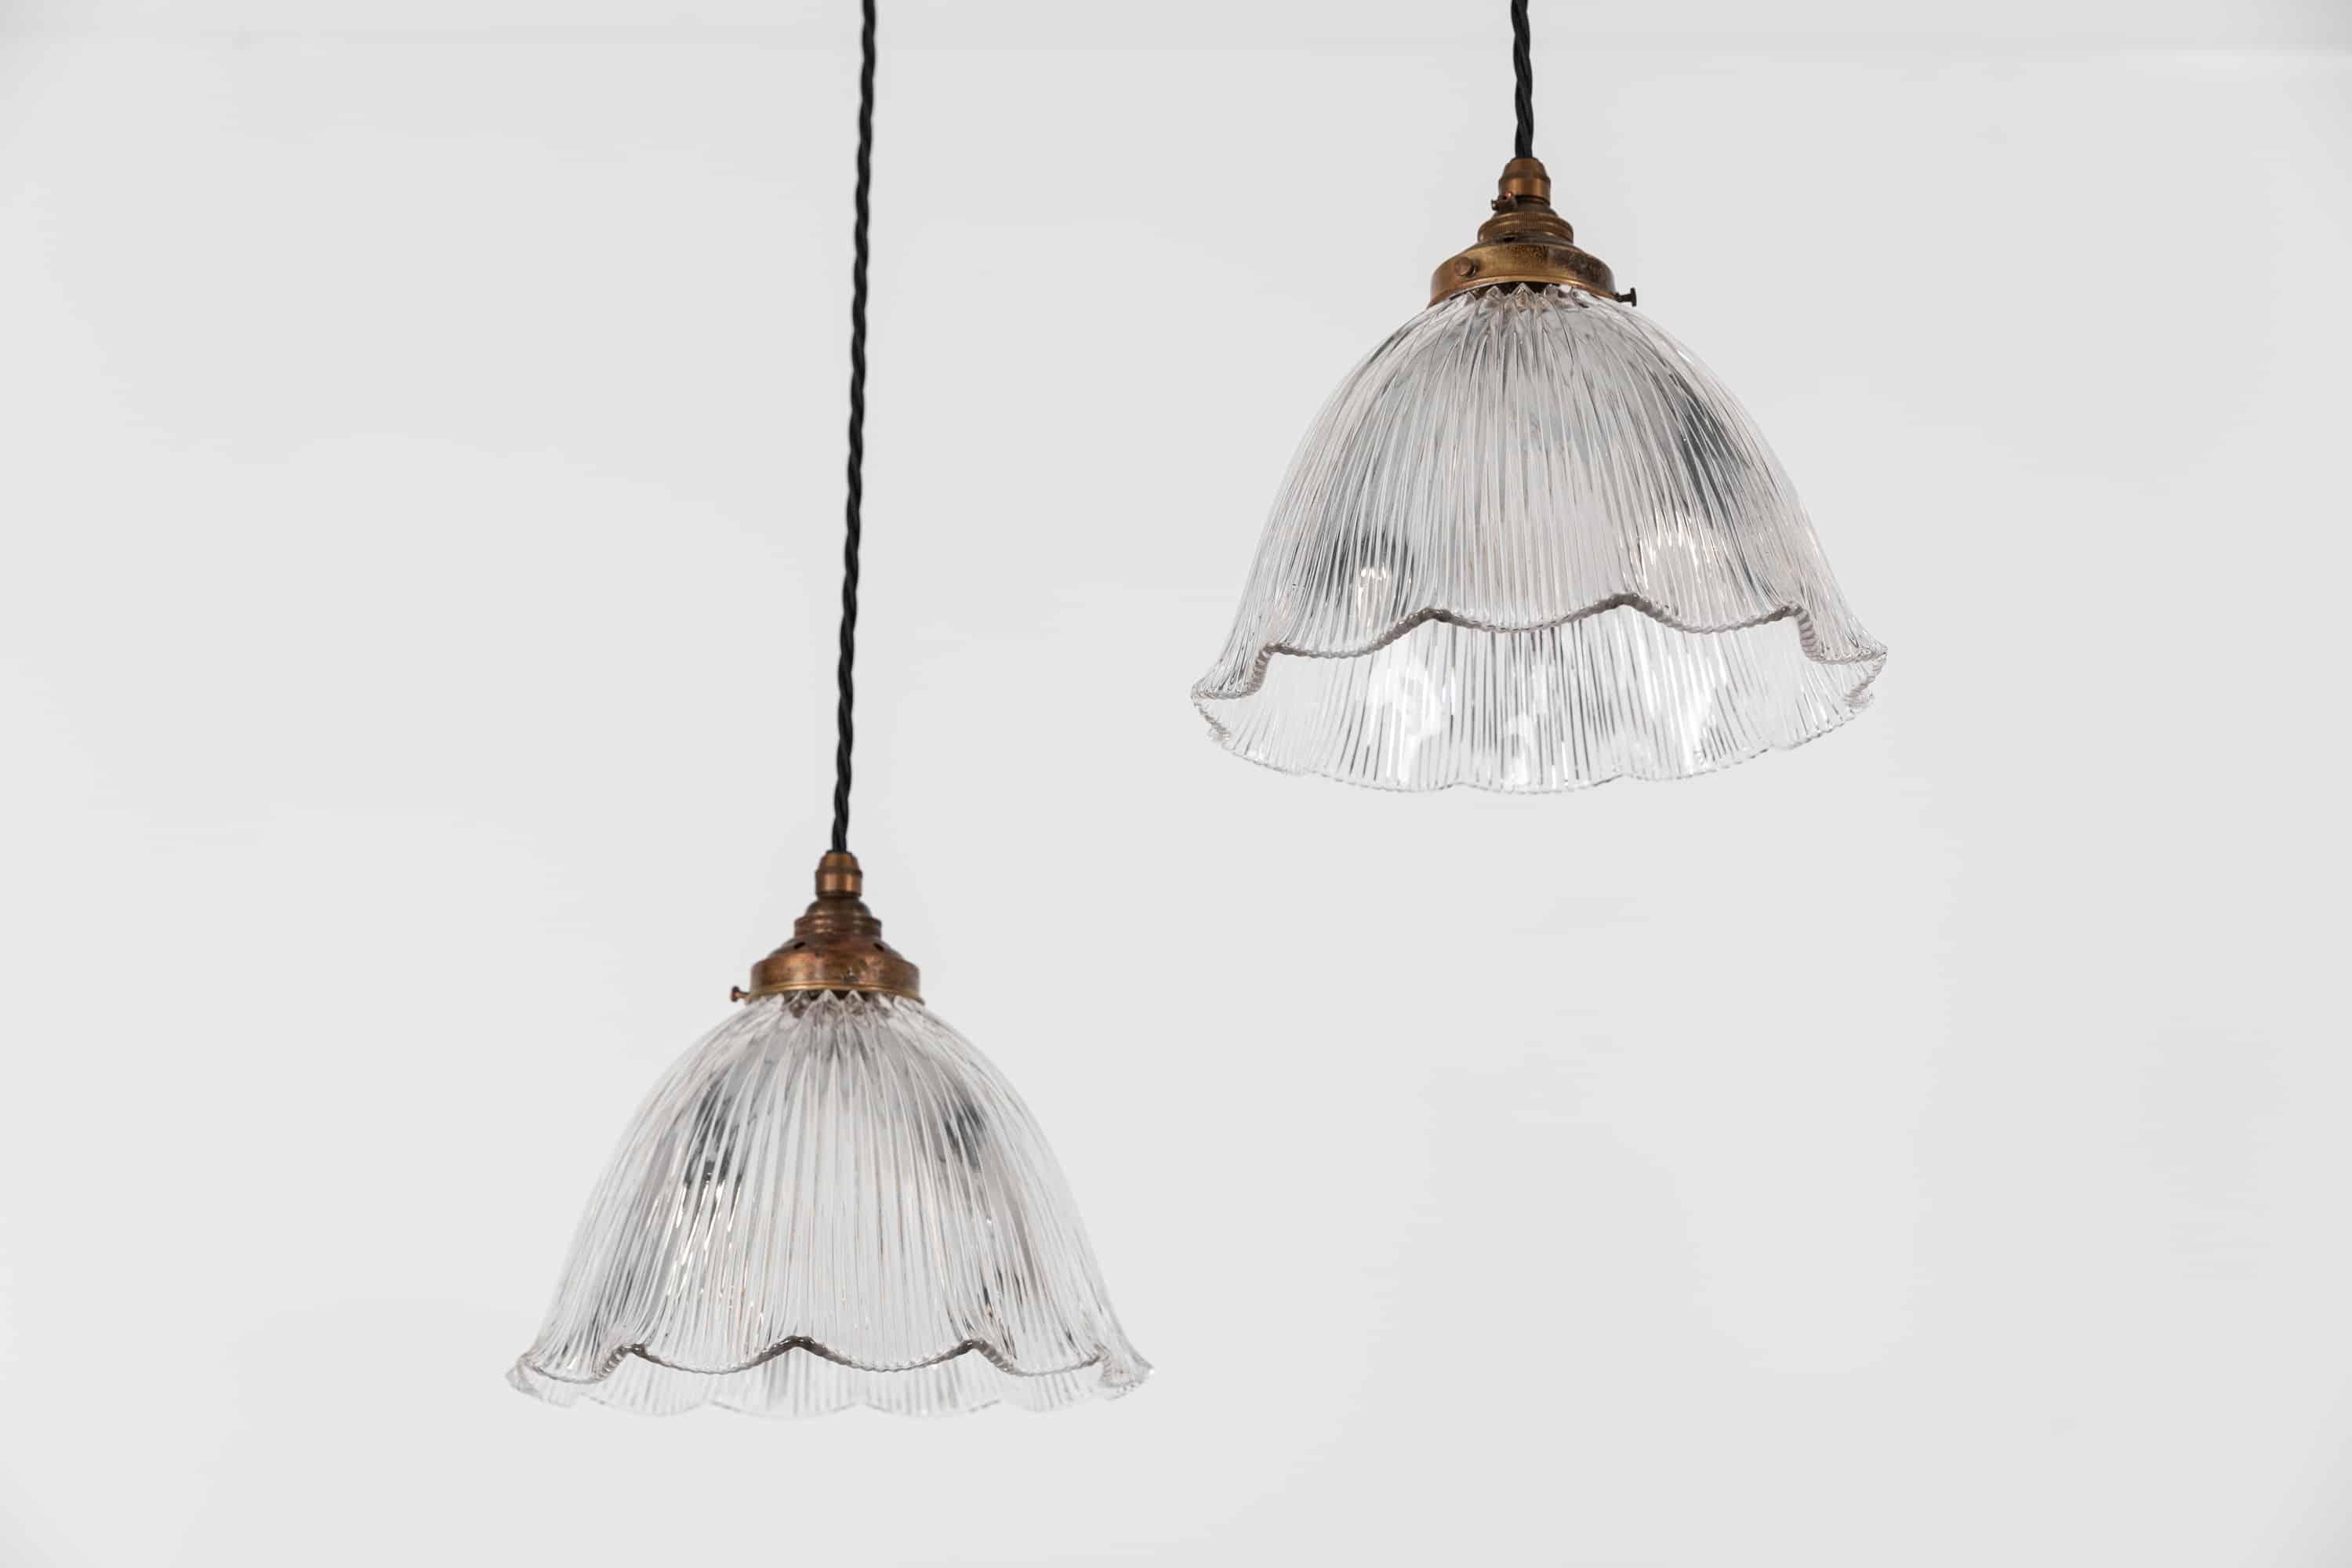 Elegantly formed prismatic glass 'Stiletto' pendant lights made in England by Holophane, circa 1920.

Clear scalloped designed glass with Holophane stamp to the rim of the shade. Period brass galleries. Price is per lamp.

Rewired with 1m of